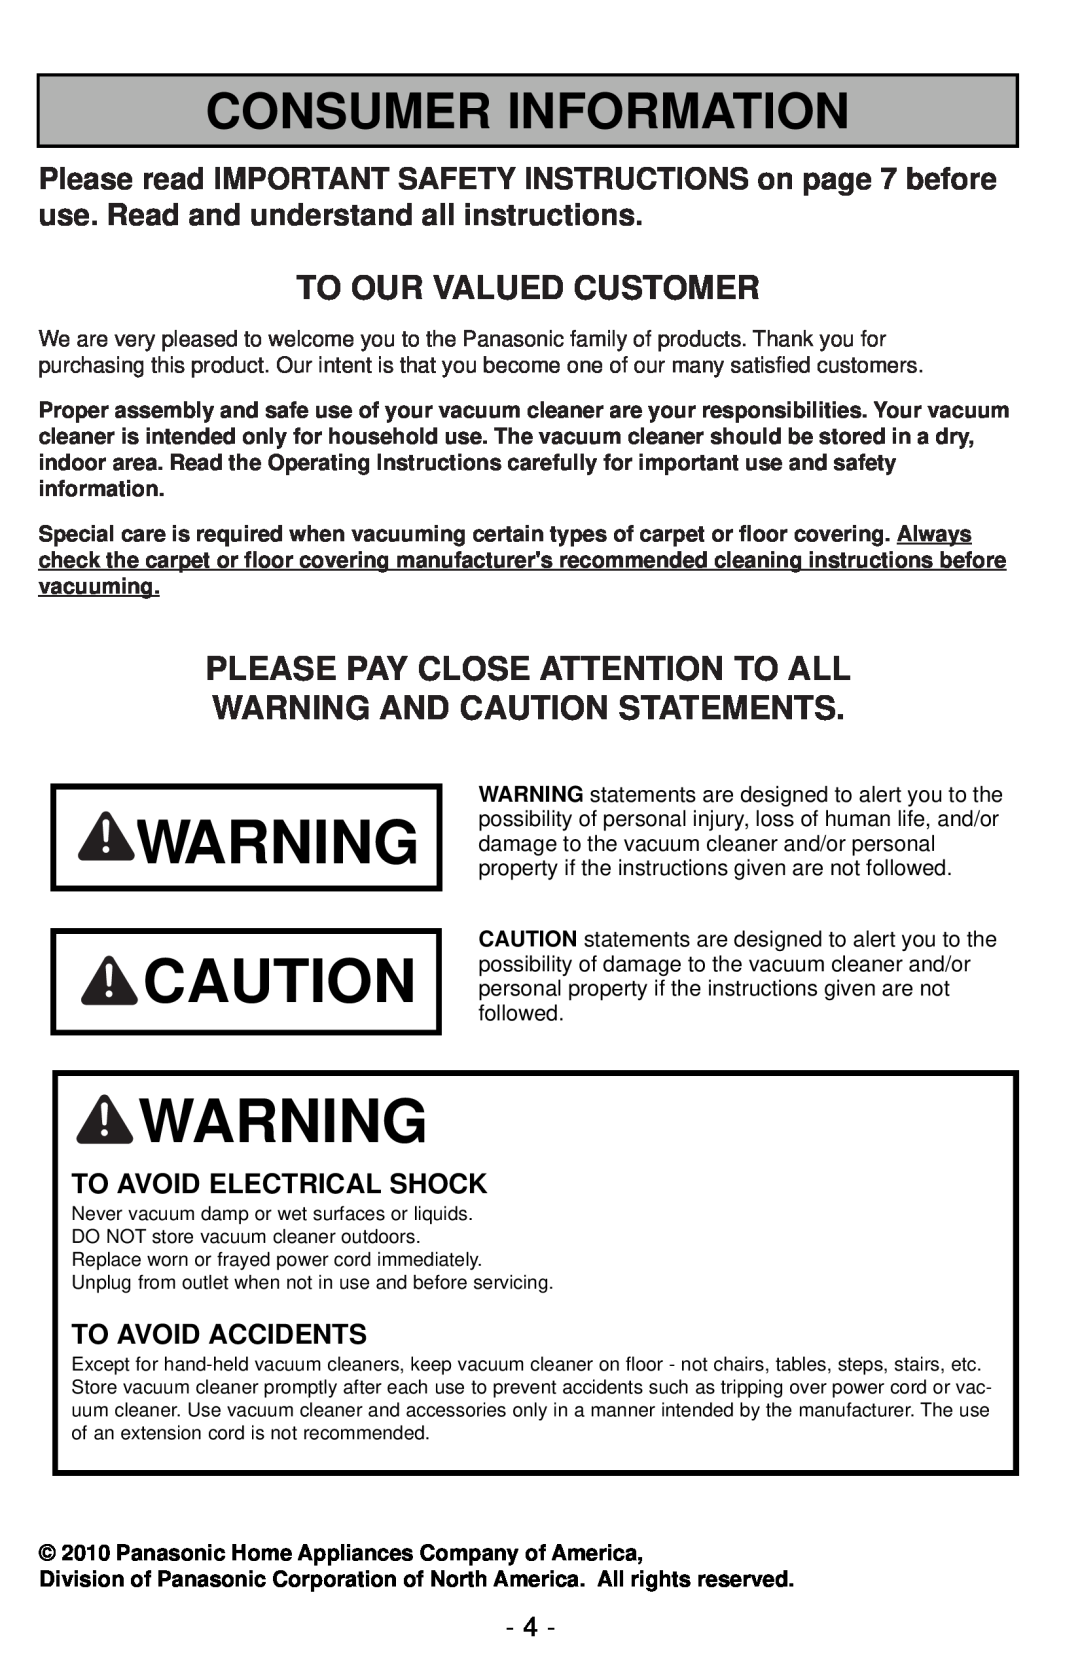 Panasonic MC-CG901 Consumer Information, To Our Valued Customer, Please Pay Close Attention To All, To Avoid Accidents 